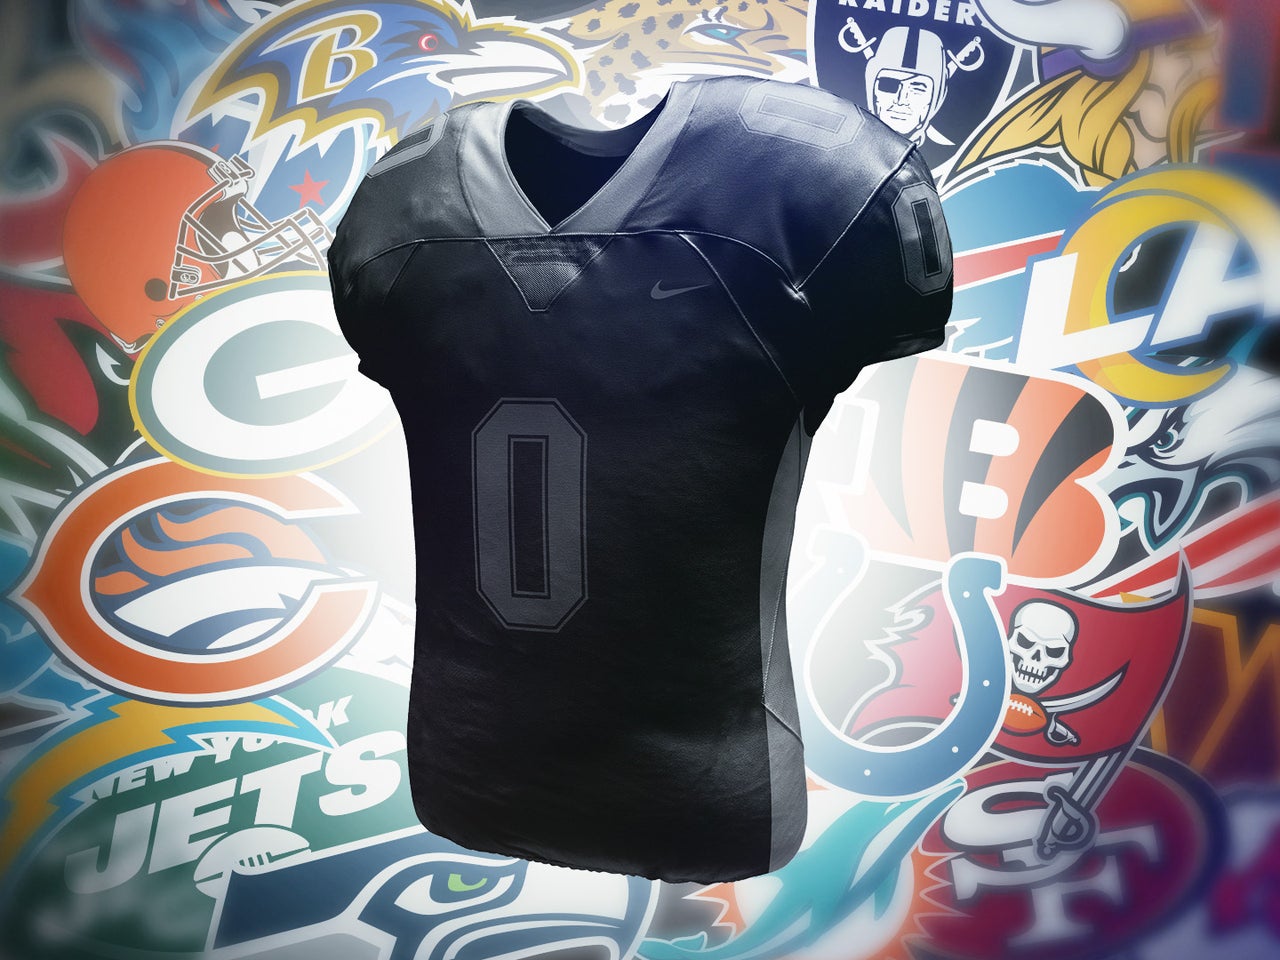 Blackout' Uniforms For Every NFL Team